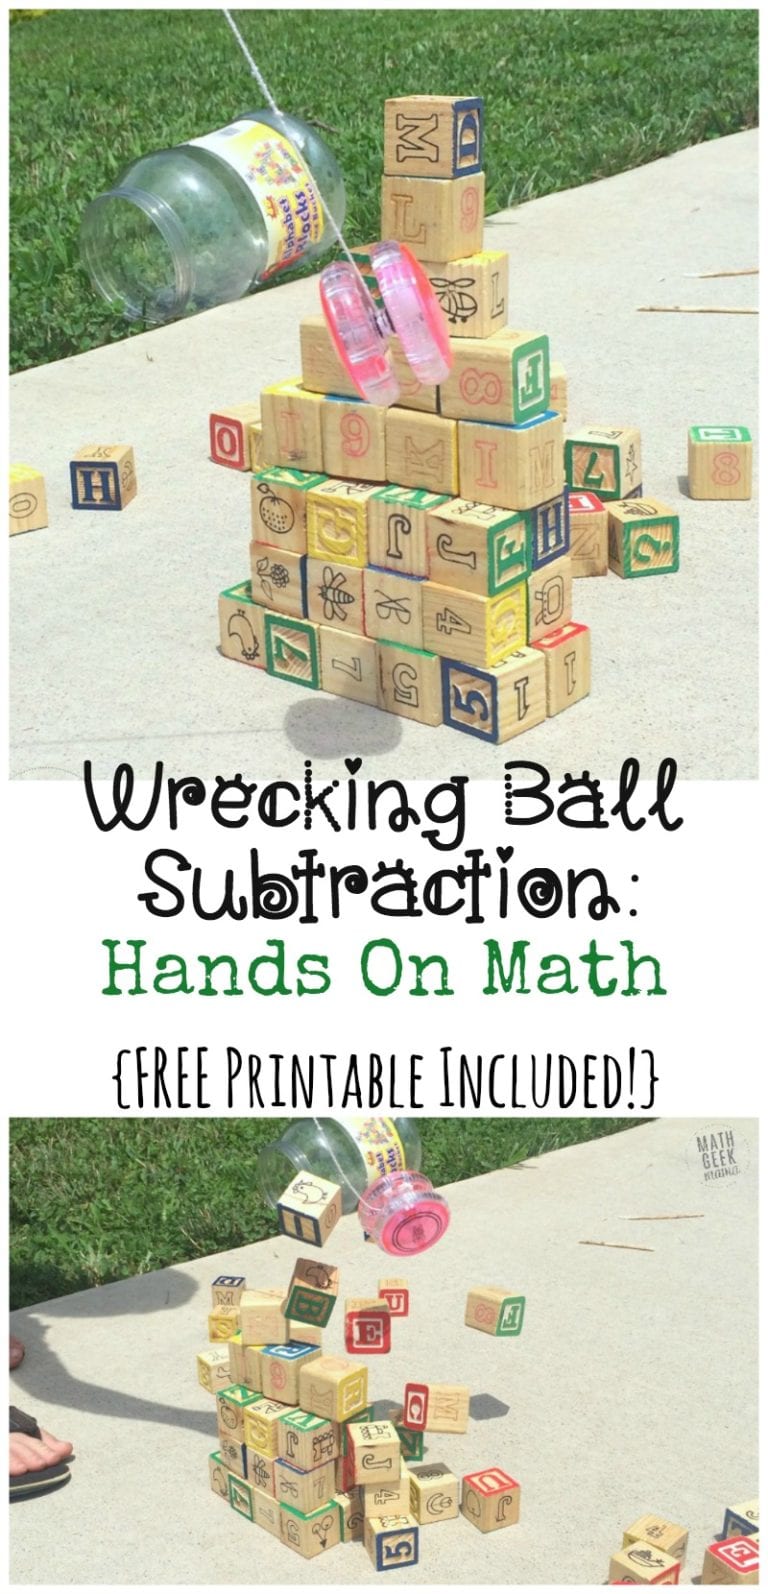 Wrecking Ball Subtraction: Hands On Math